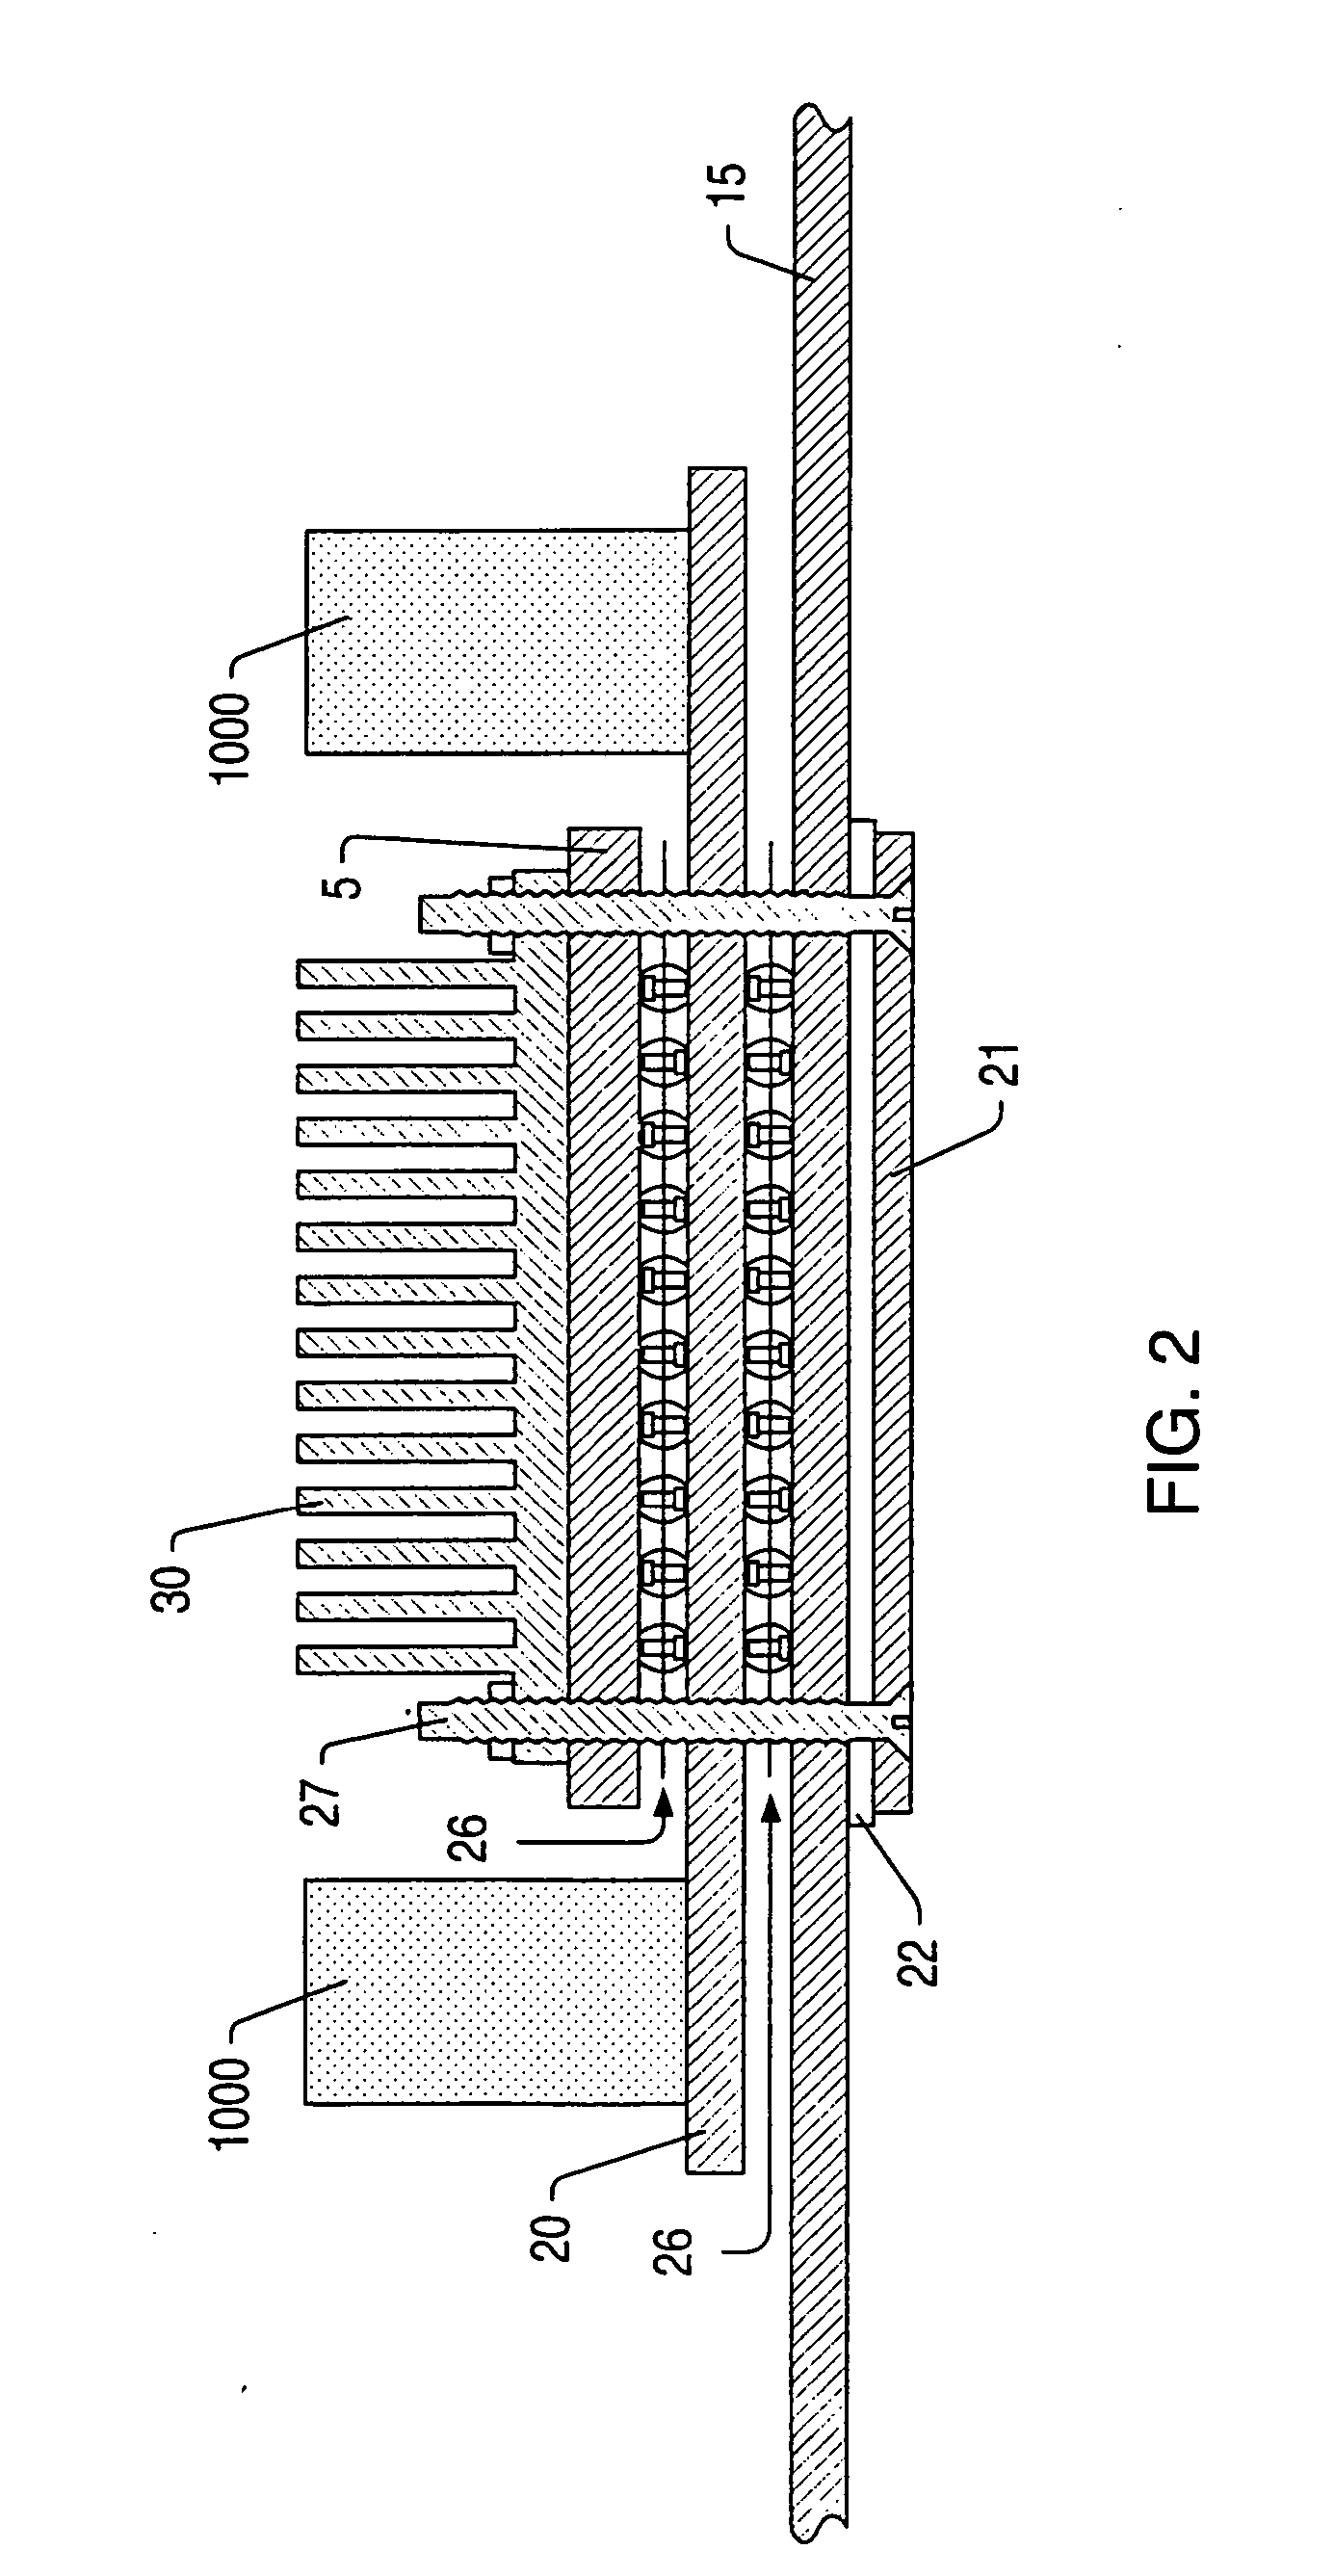 Power distribution system with a dedicated power structure and a high performance voltage regulator